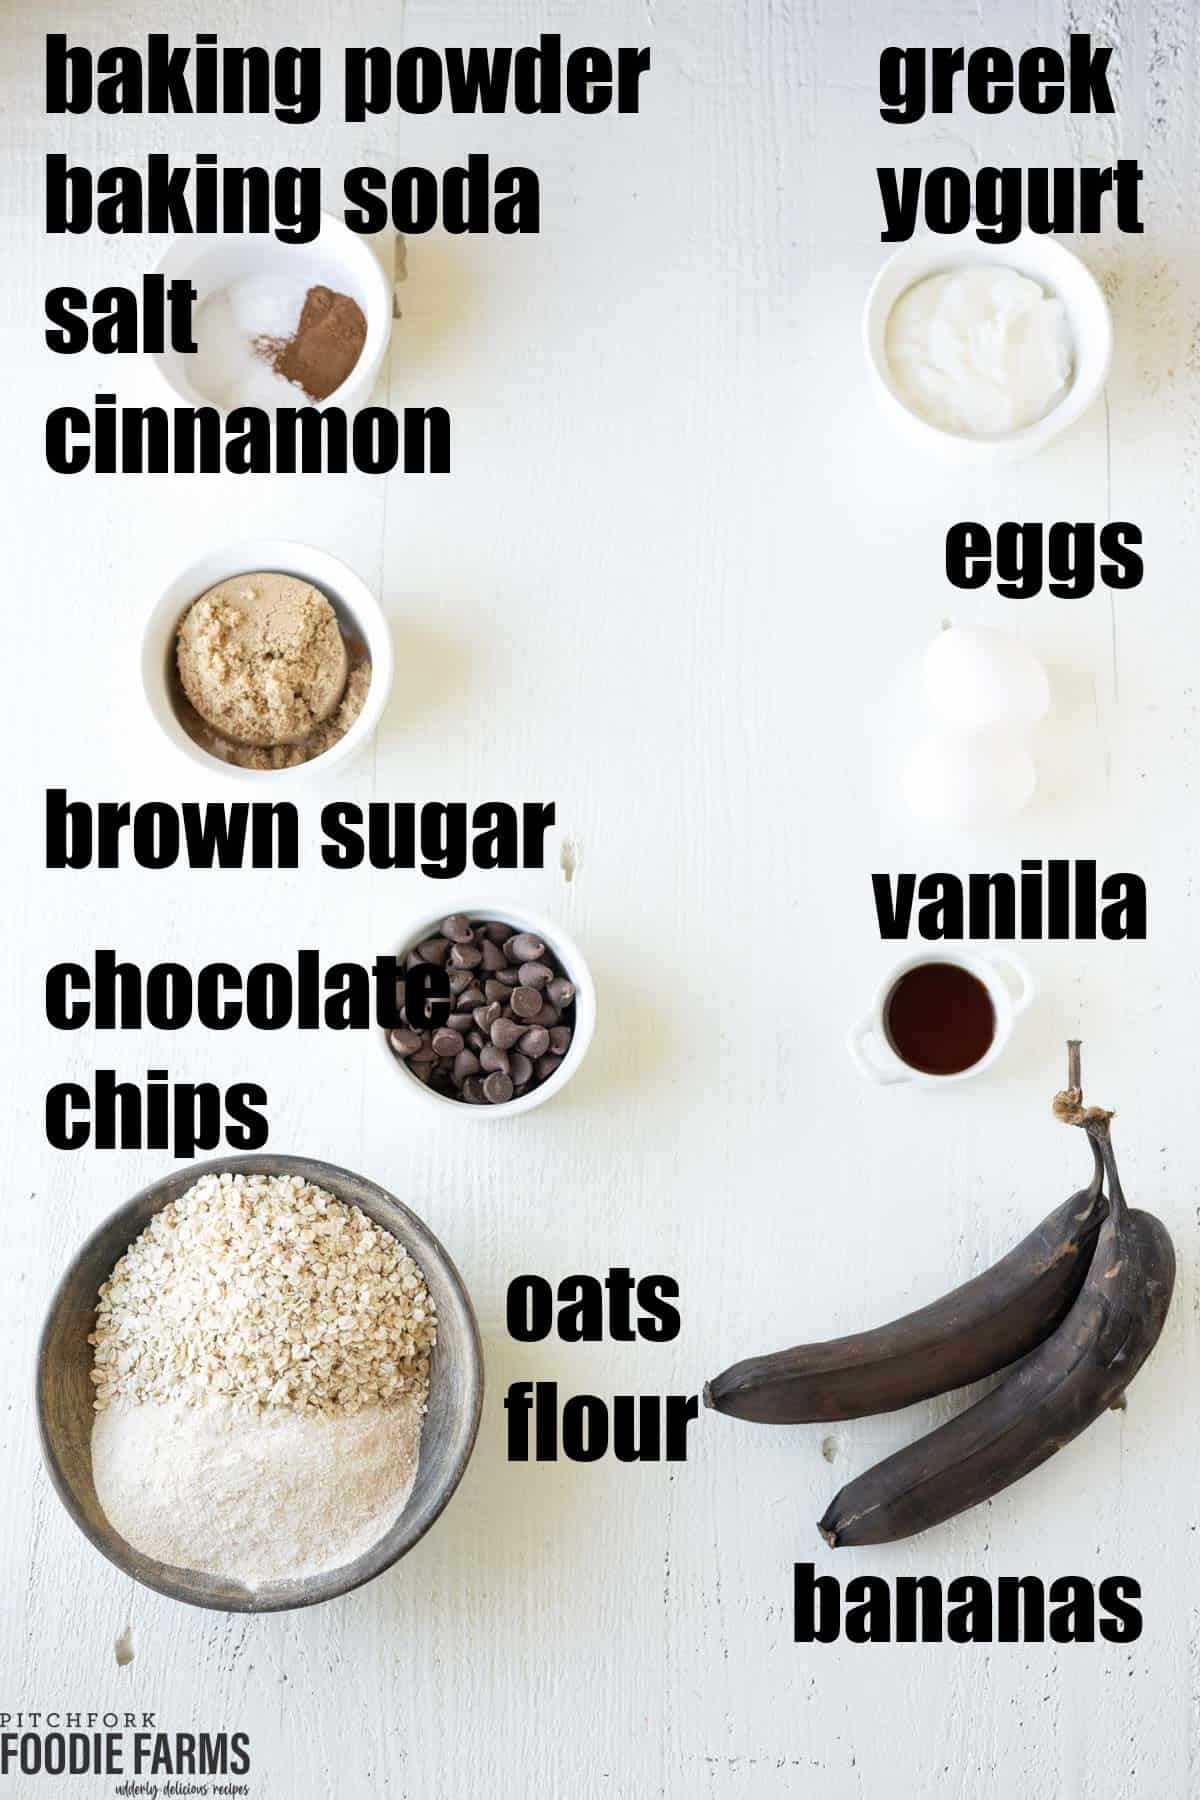 Ingredients needed to make banana muffins with oats, chocolate chips, and Greek yogurt.